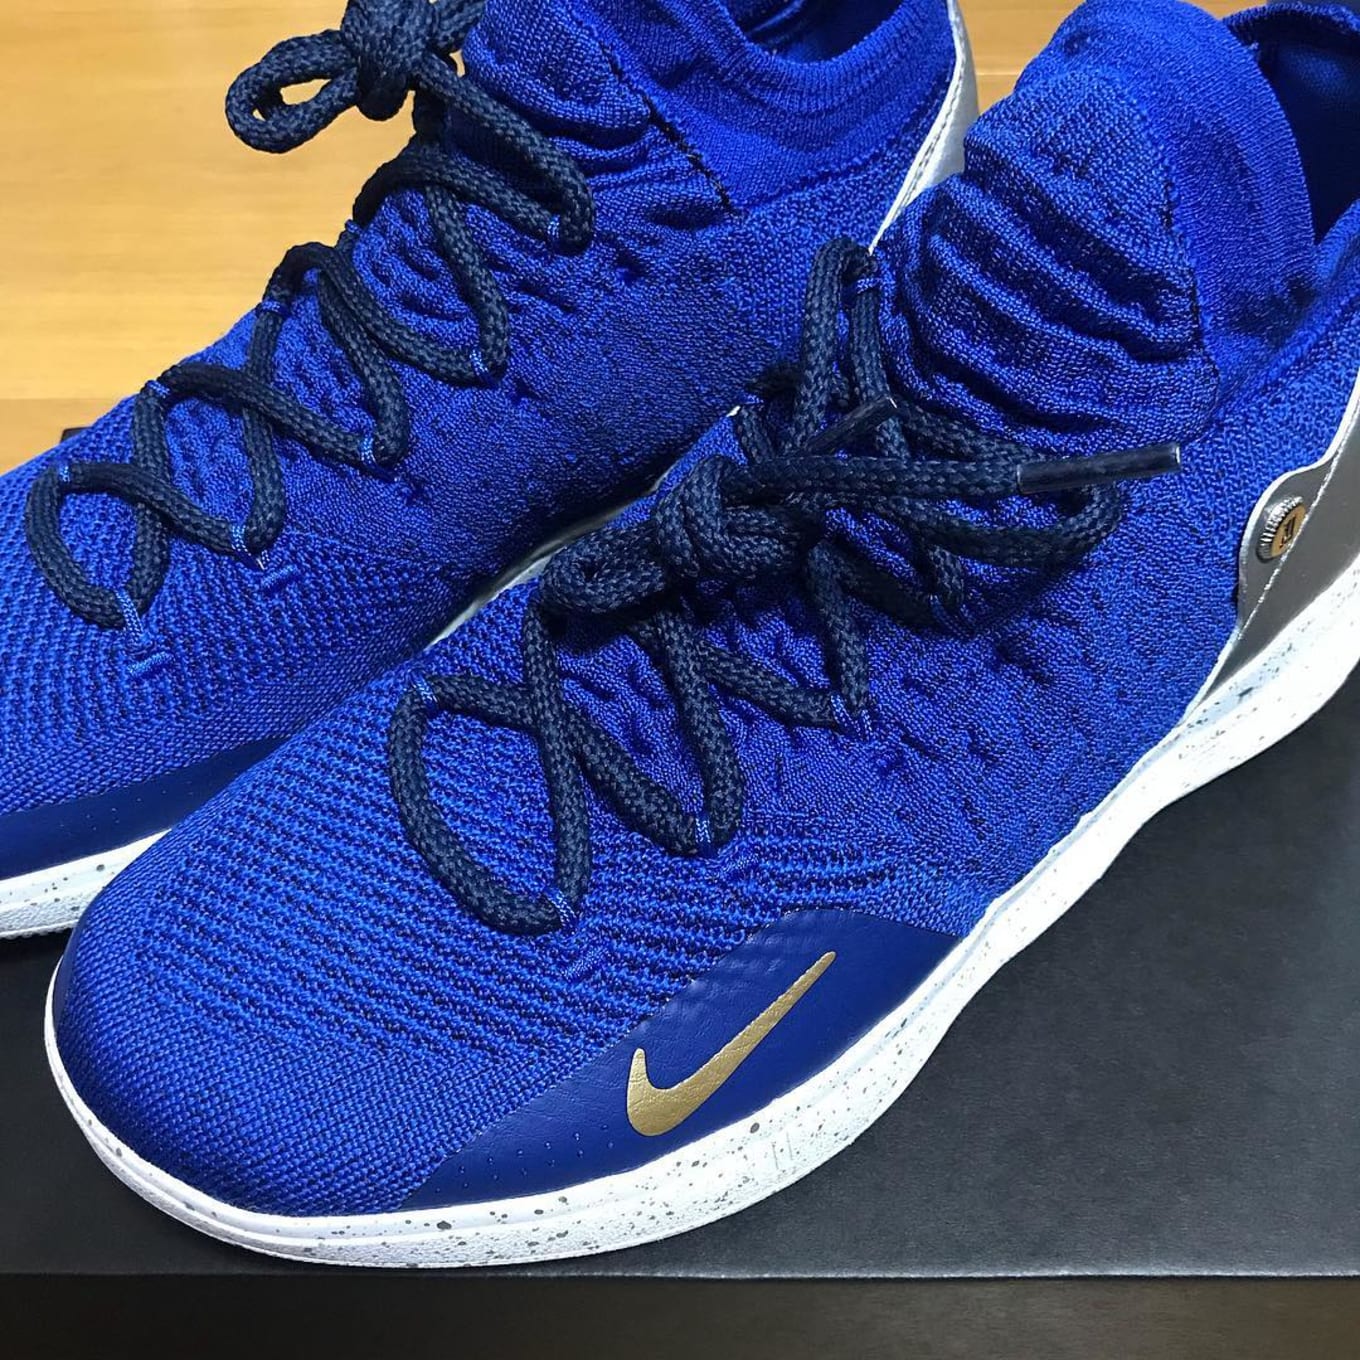 blue and gold kd 11